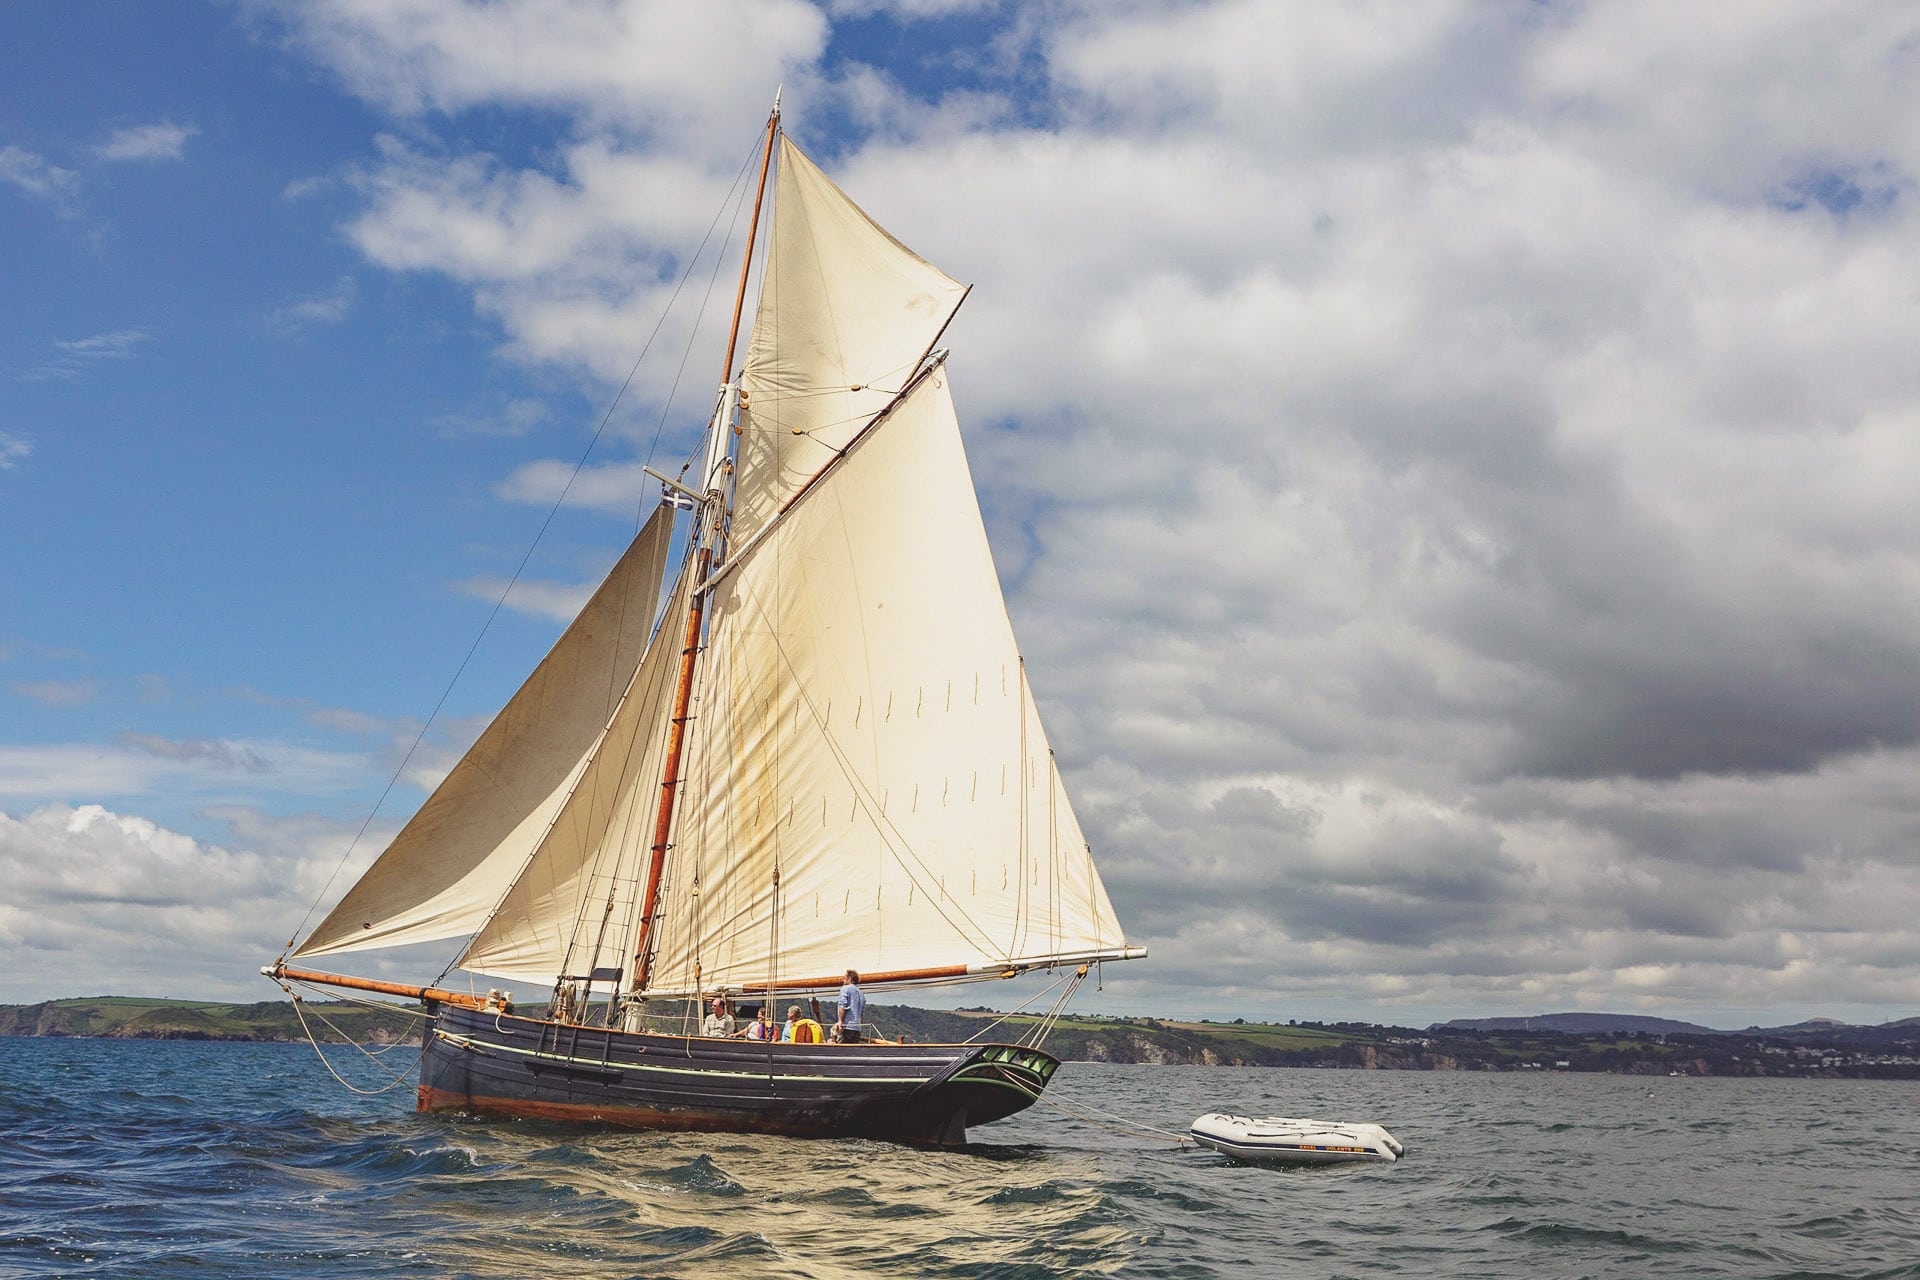 Agnes charter boat full sail in Cornwall